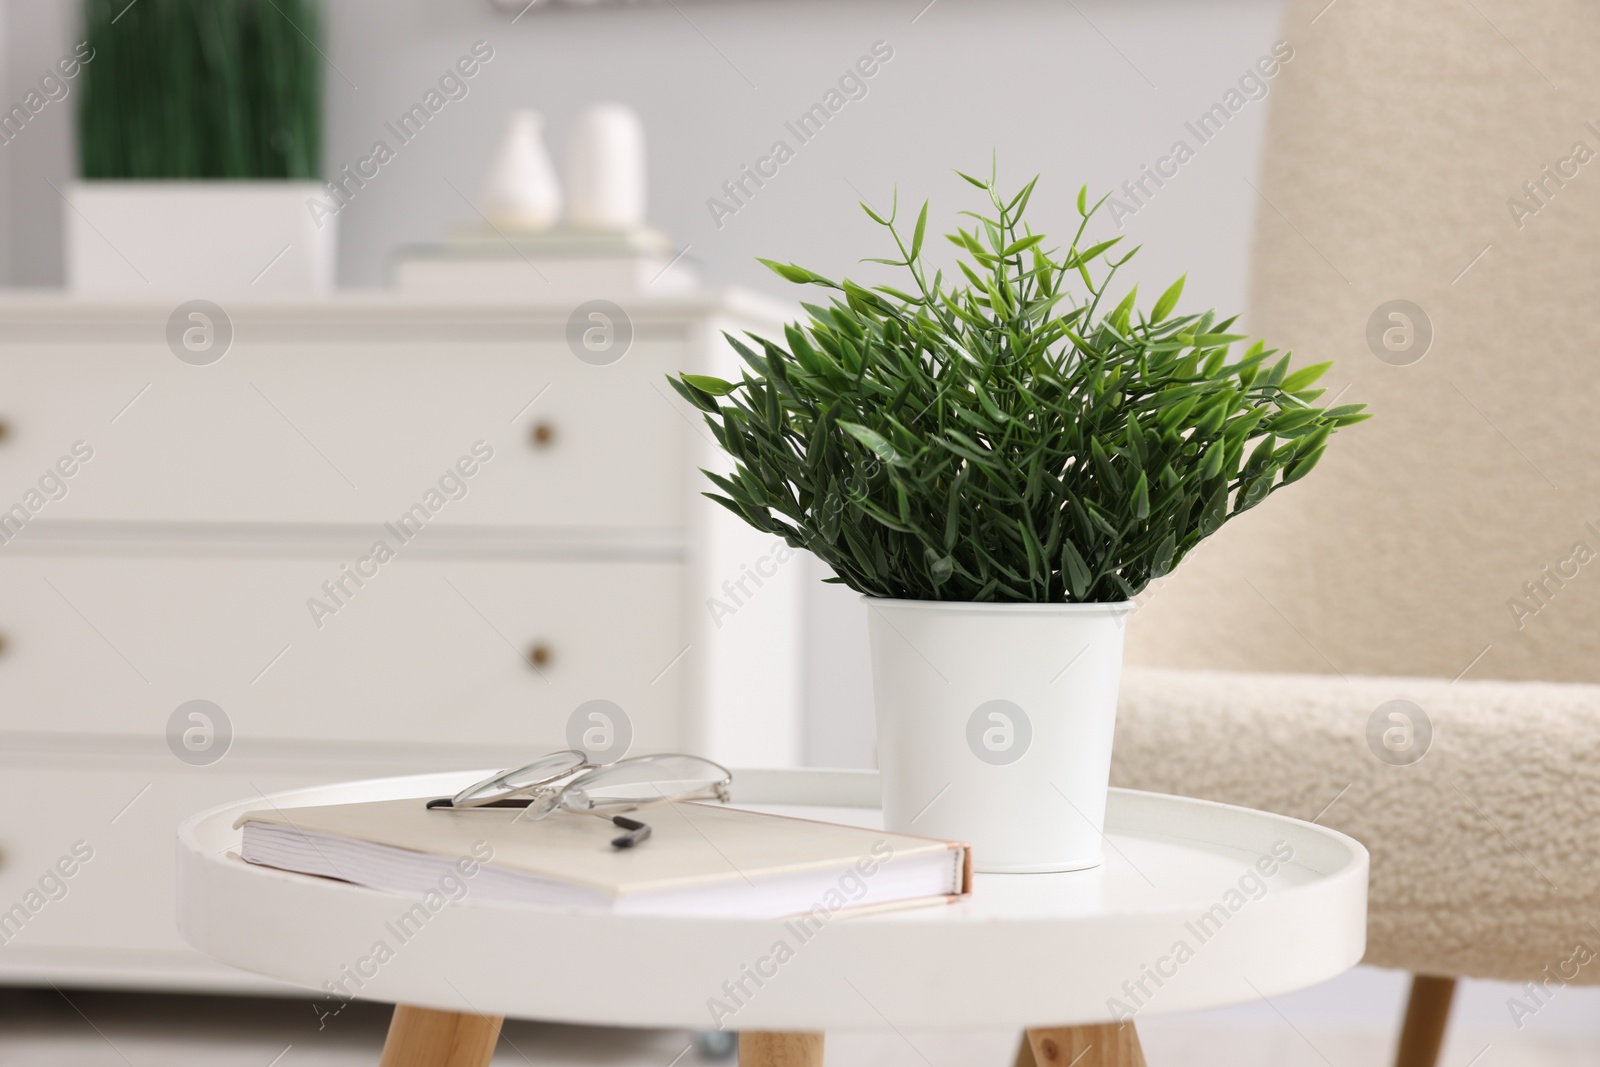 Photo of Potted artificial plant, book and glasses on side table near armchair indoors